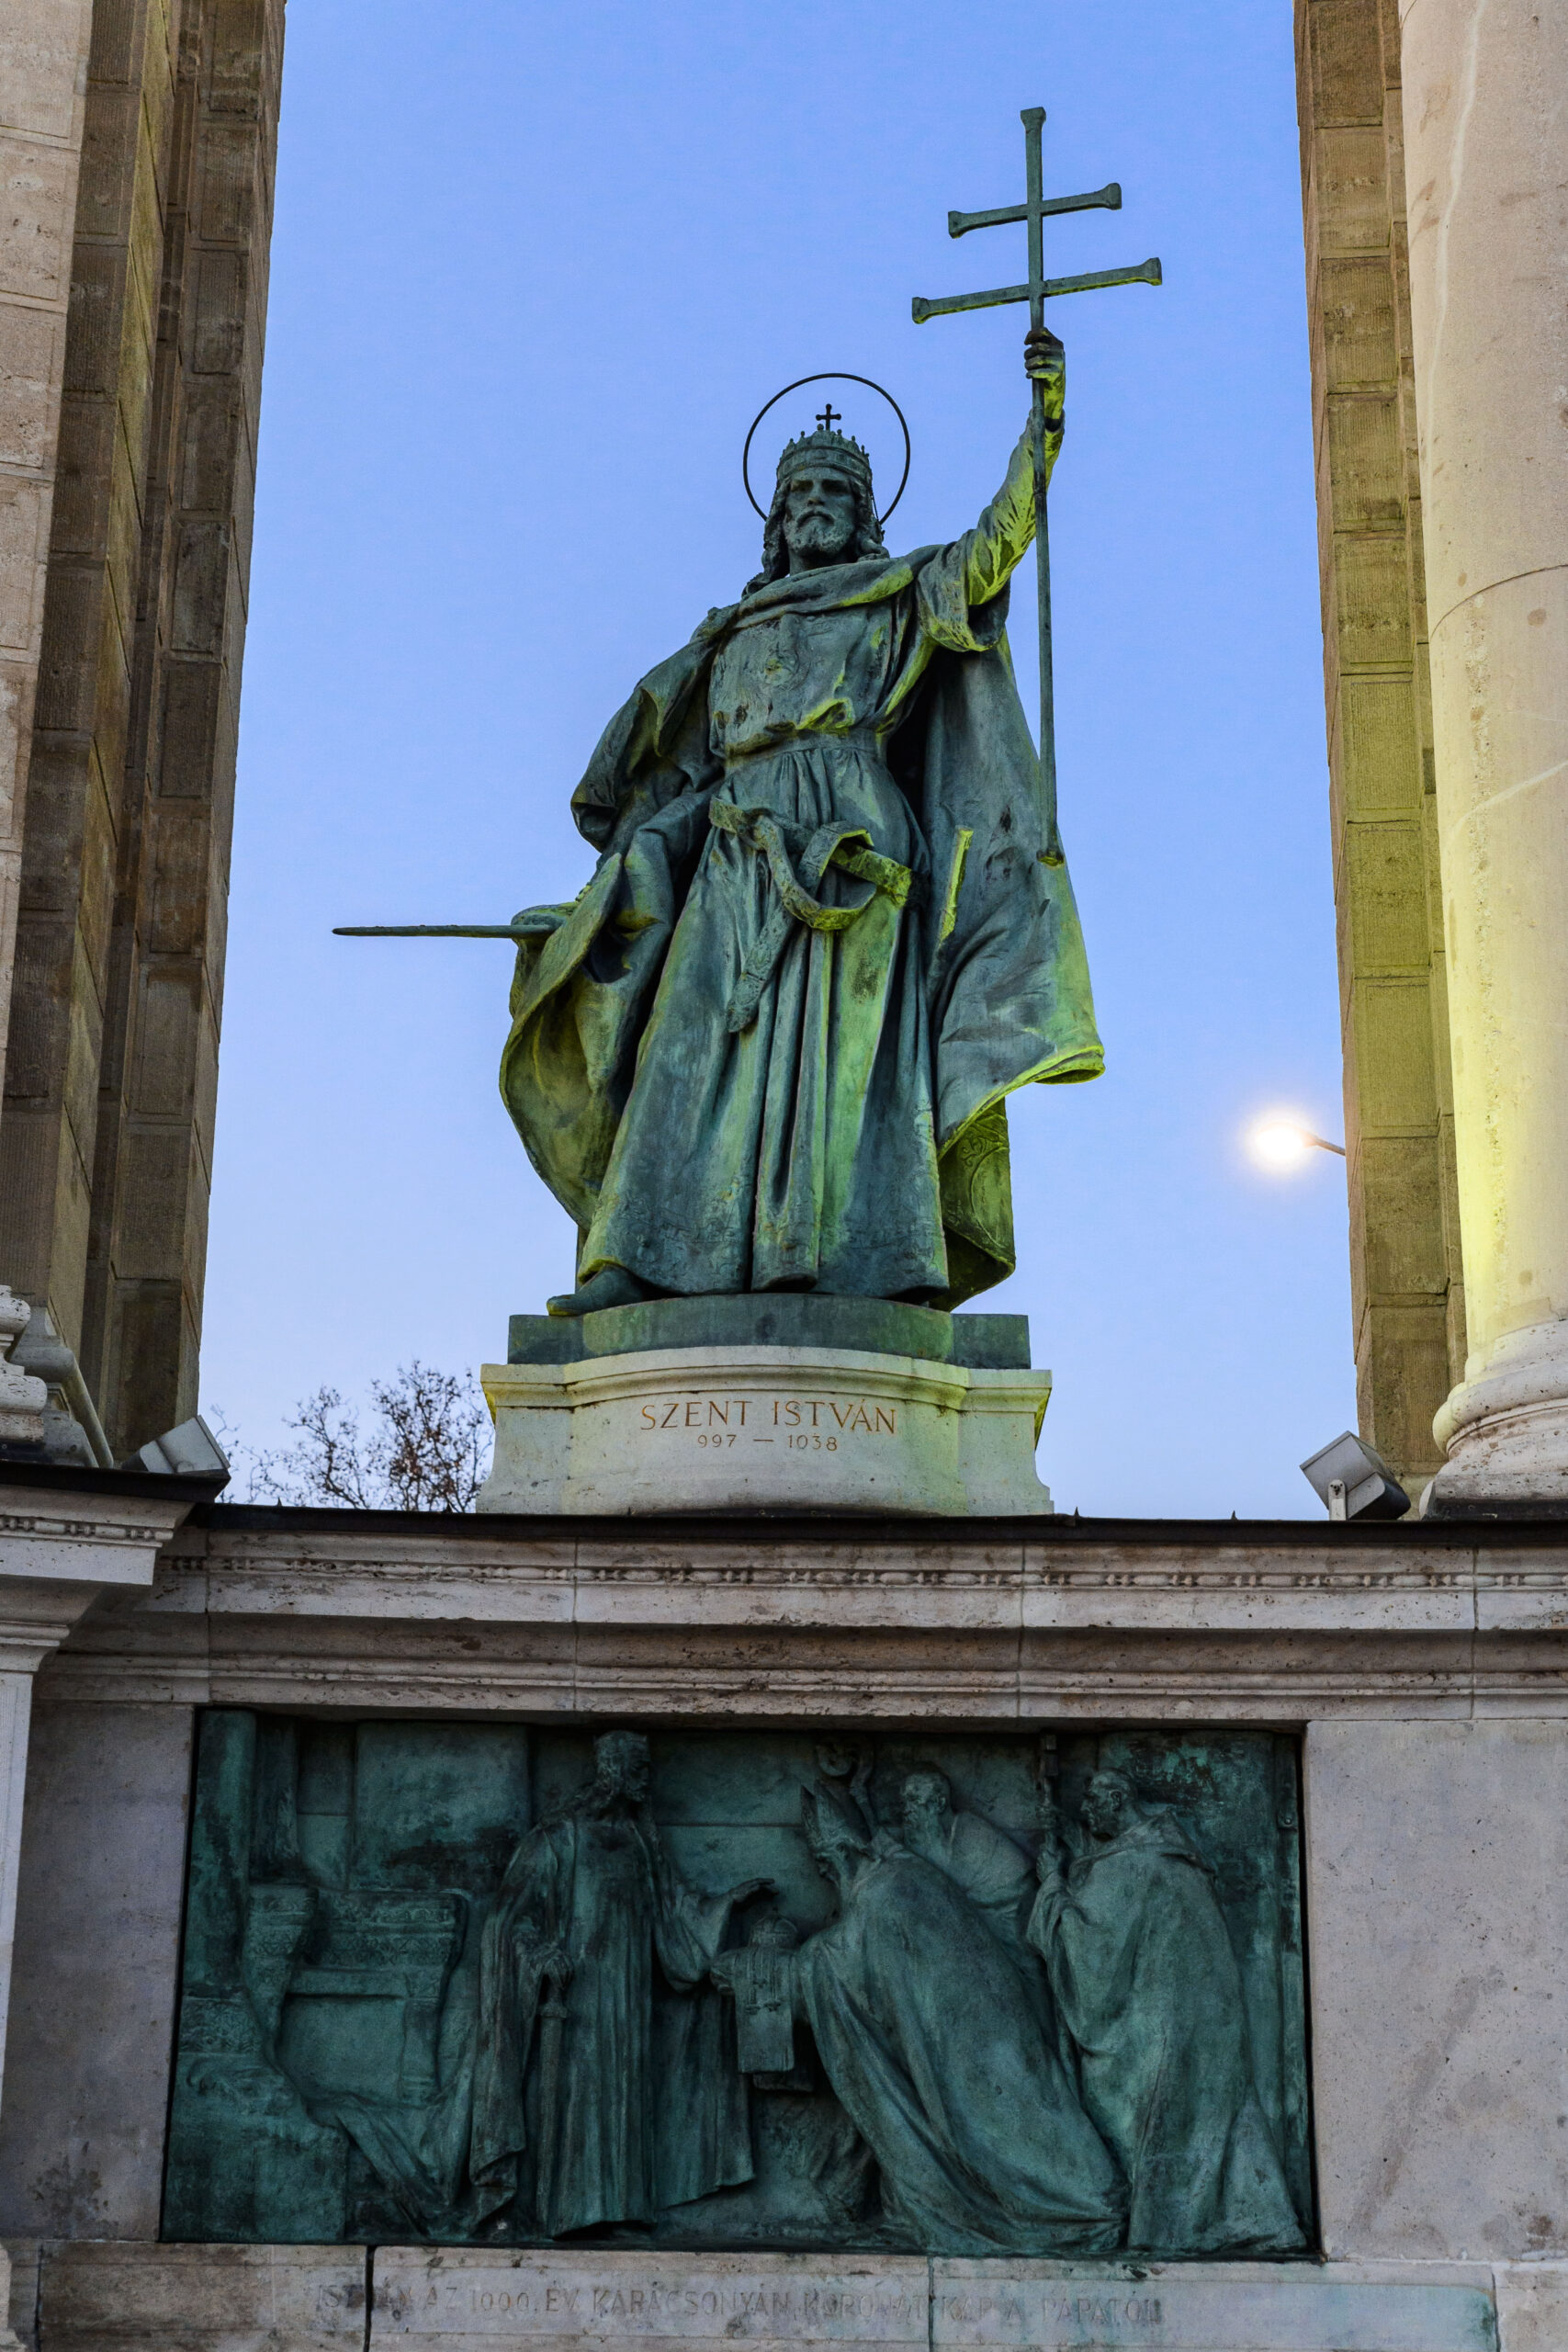 Statue of Saint Stephen, the founder of Hungary